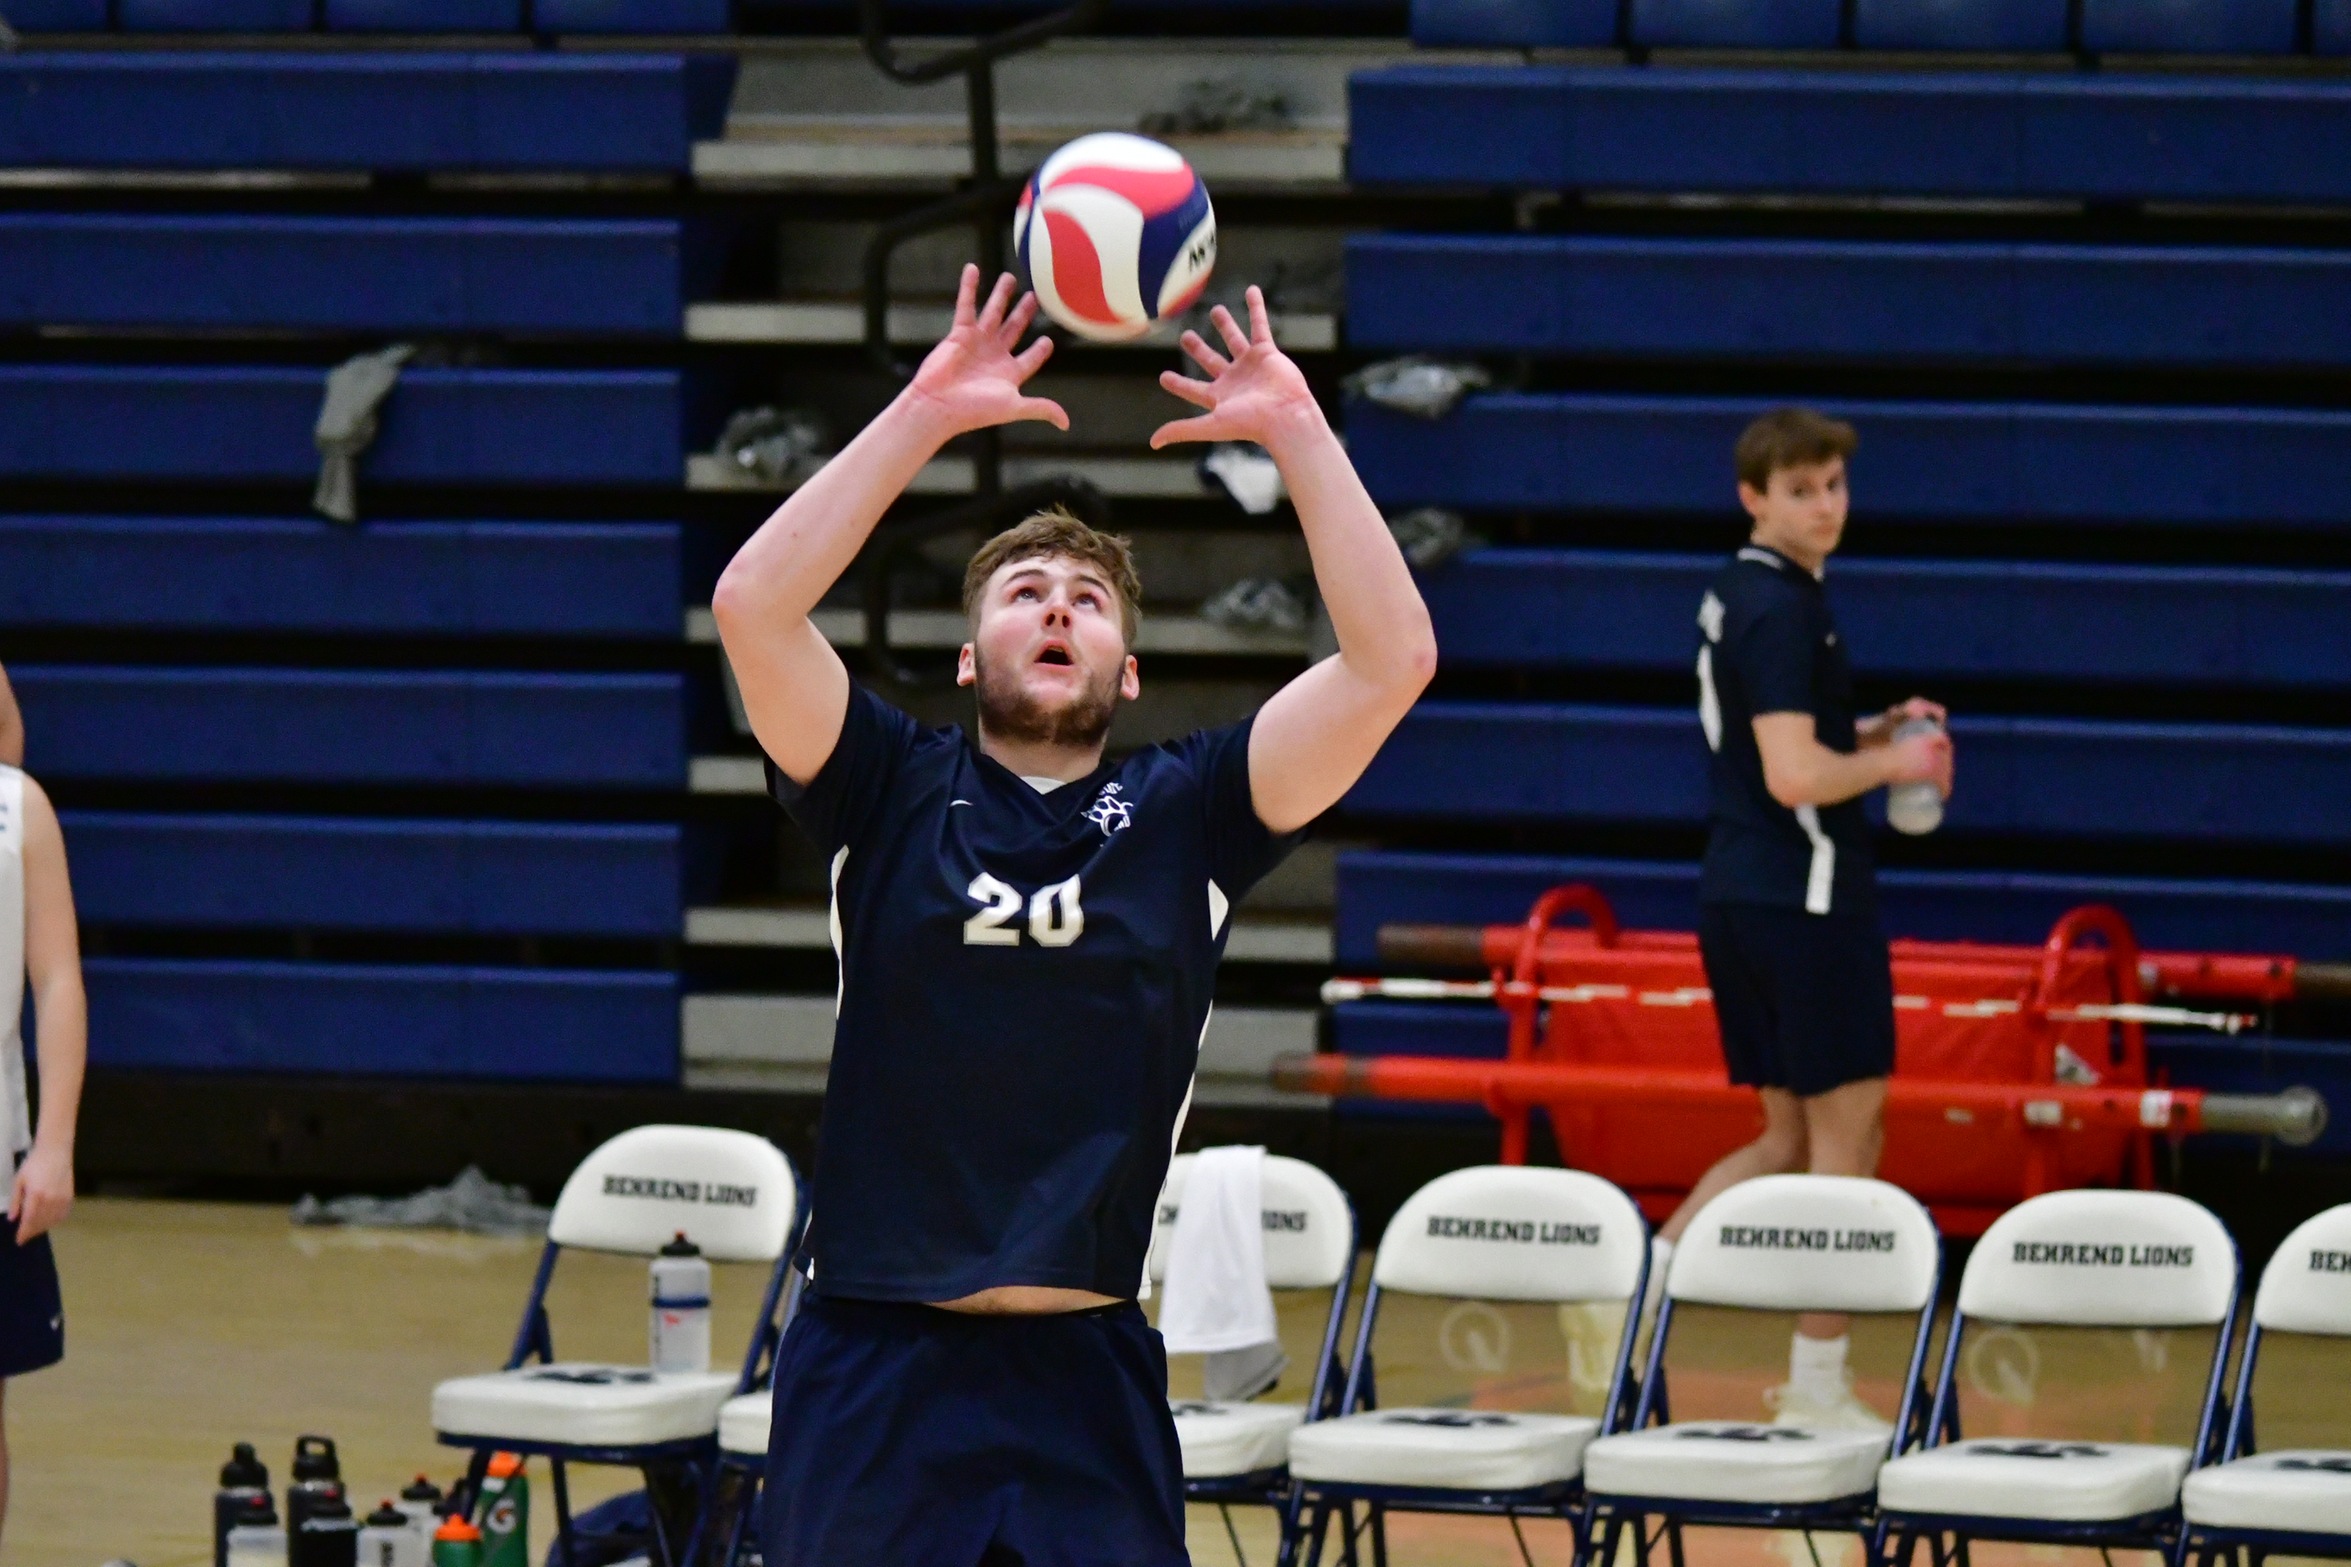 Behrend Men's Volleyball Falls at Thiel in AMCC Opener